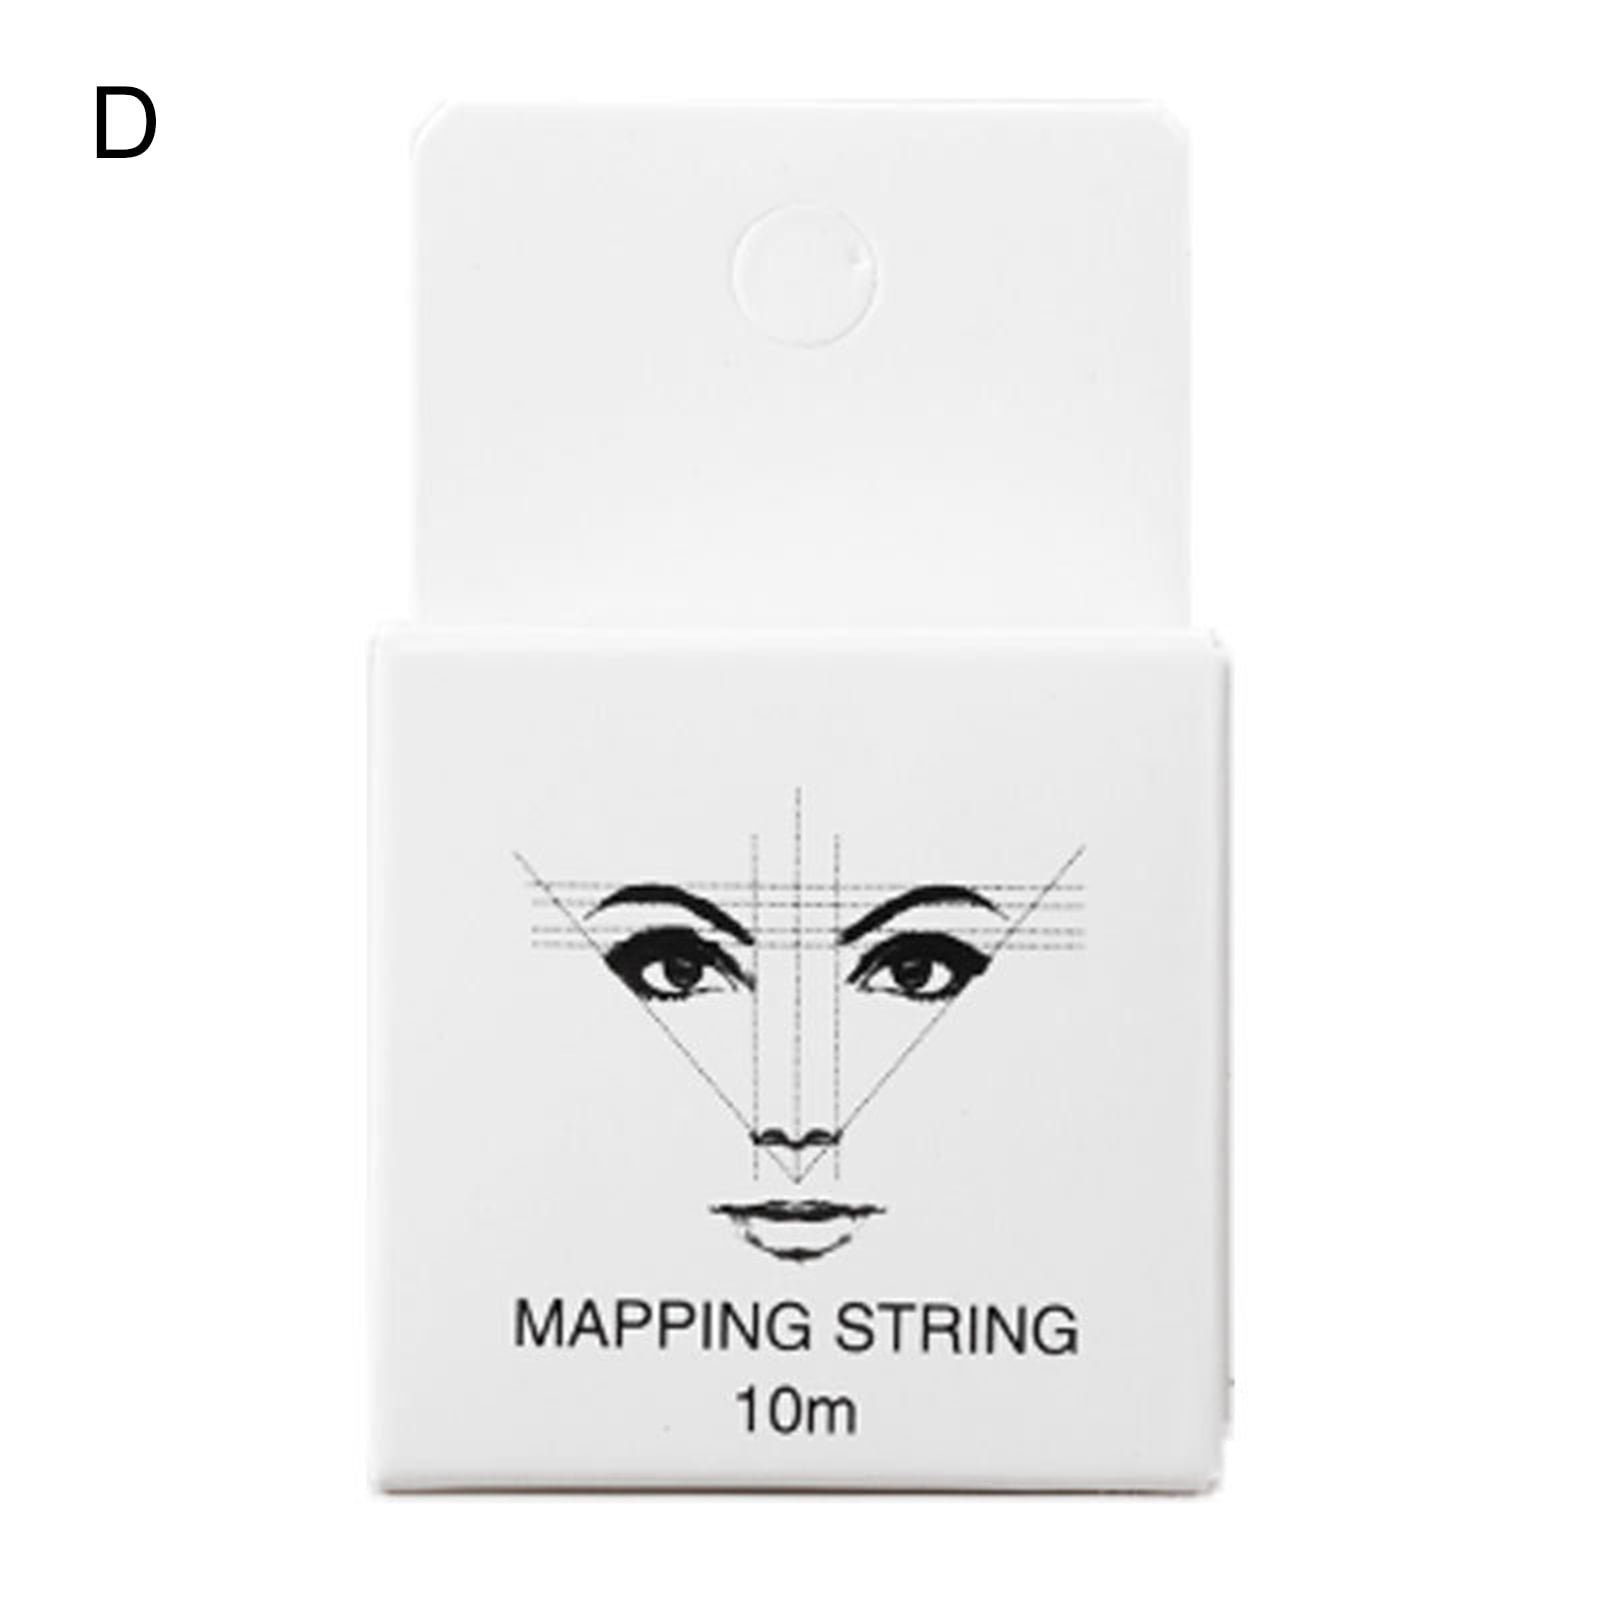 greenhome 10m Eyebrow Mapping String Ultra Long Shaping Eyeline Thin ...